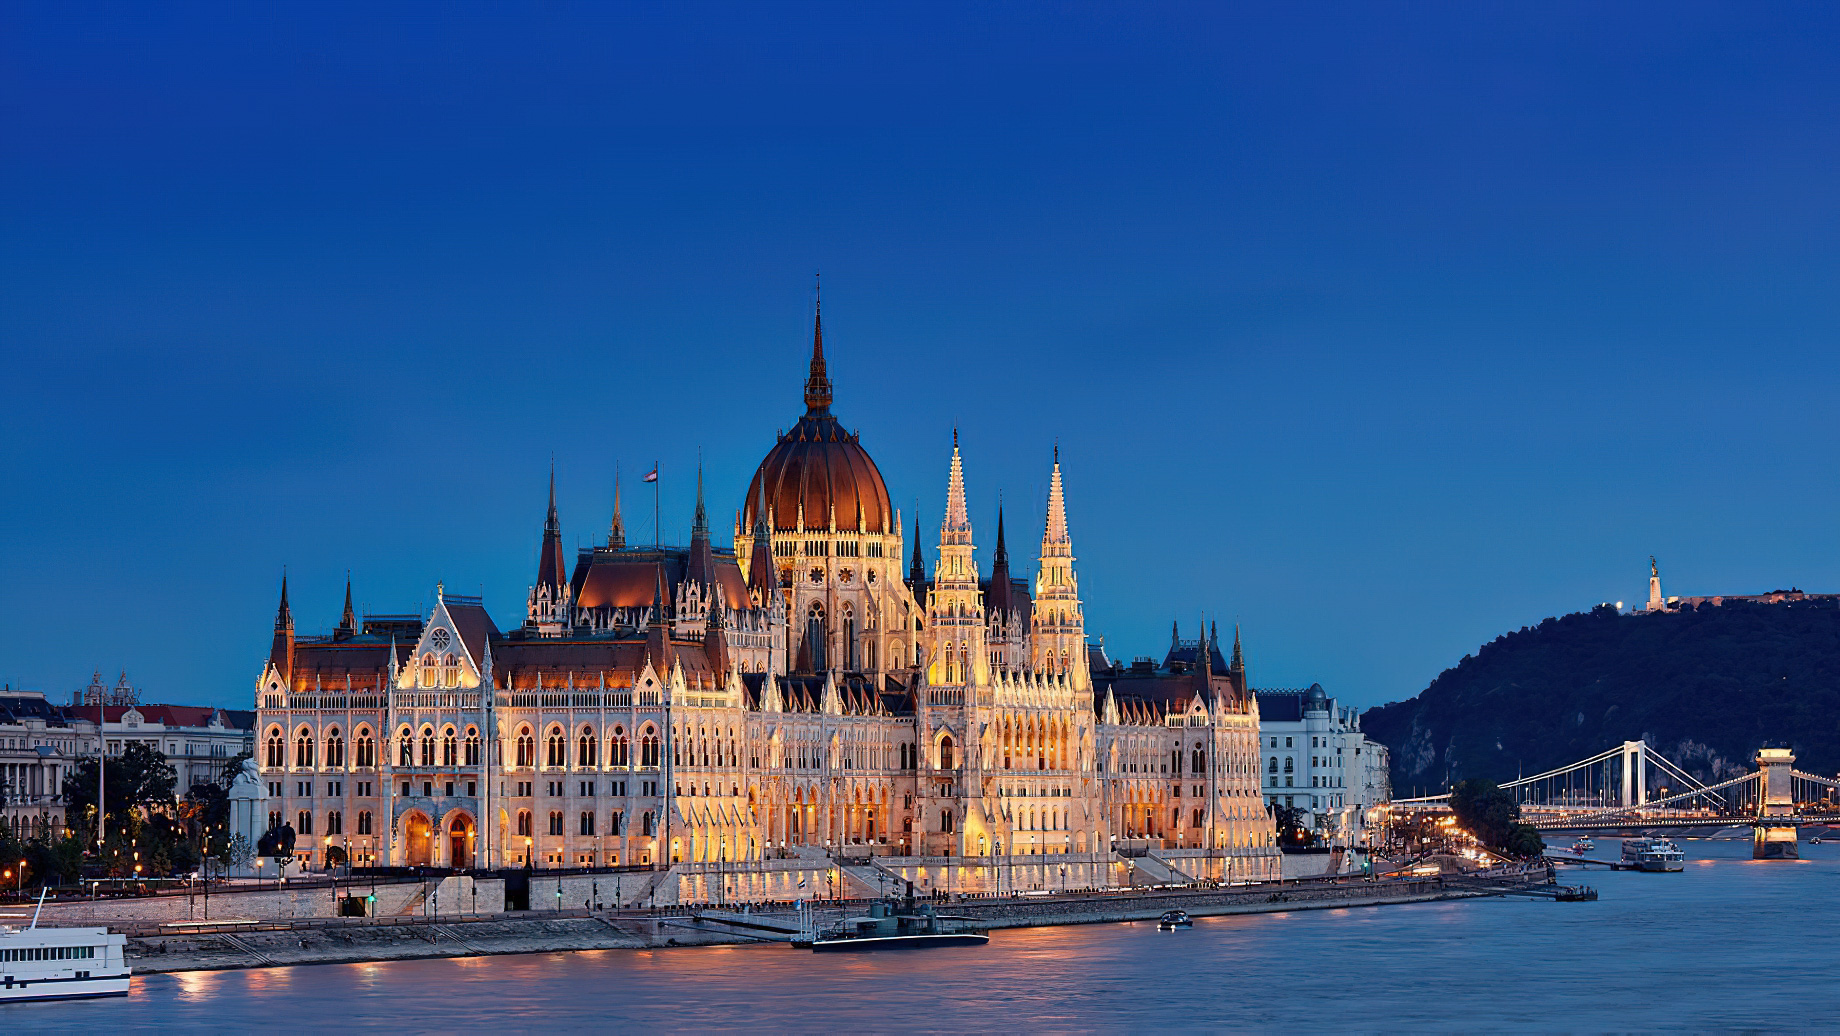 The Ritz-Carlton, Budapest Hotel – Budapest, Hungary – Parliment Building Night River View